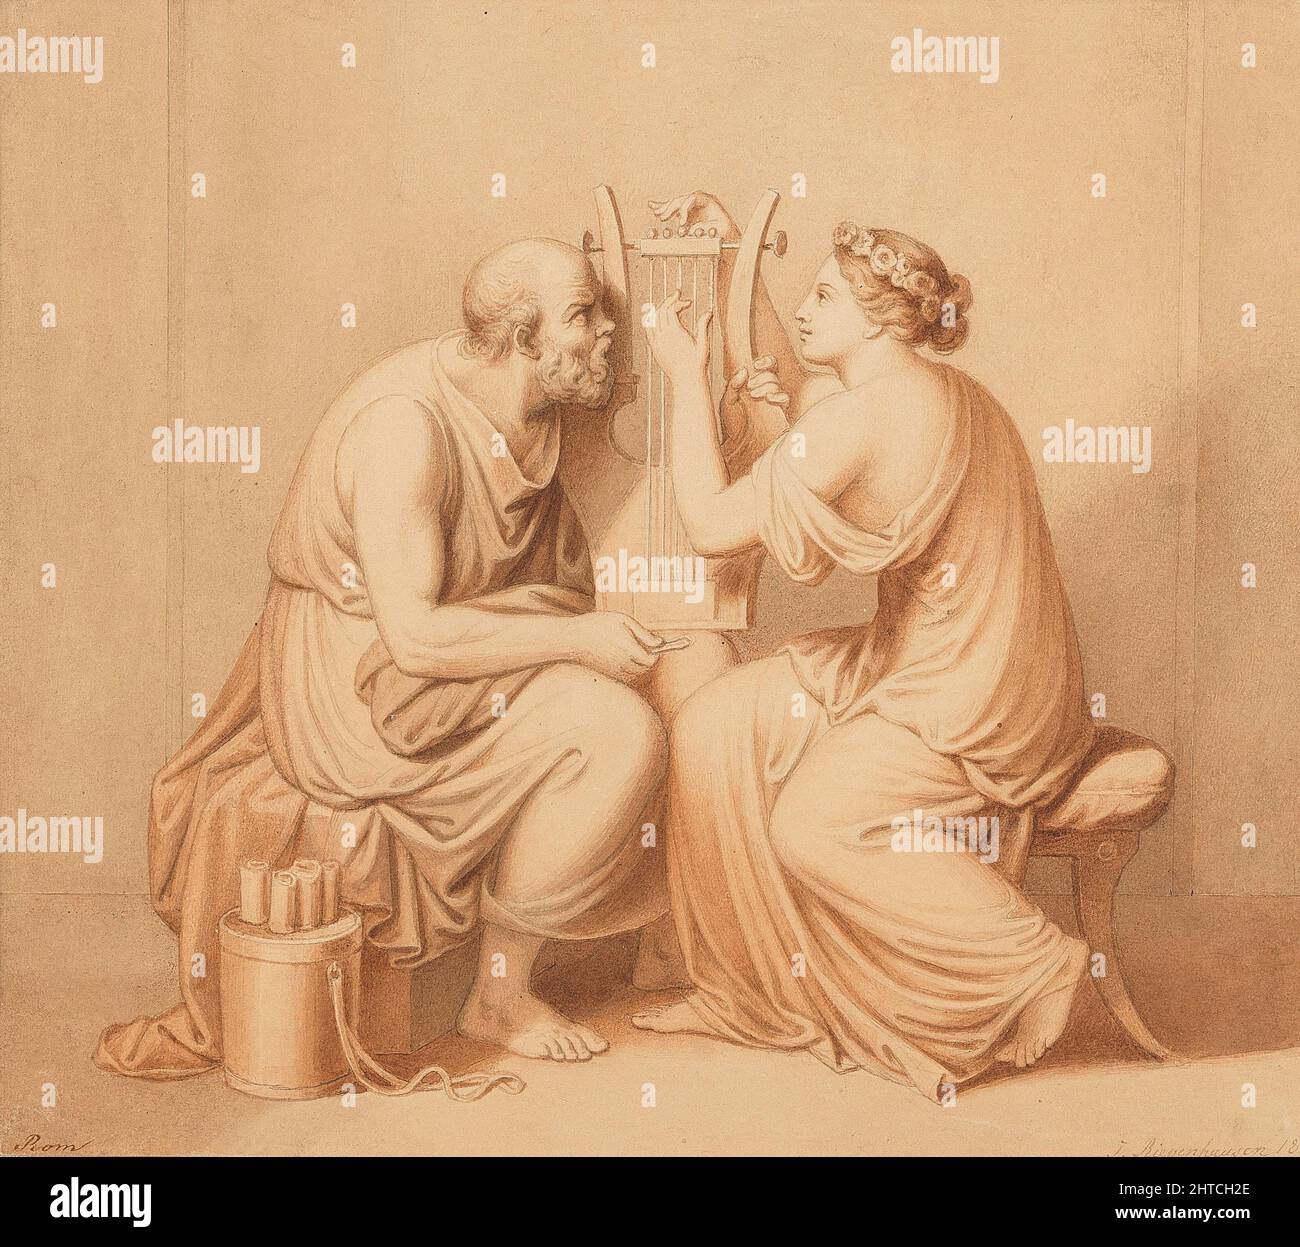 Socrates learning the lyra, 1851. Private Collection. Stock Photo